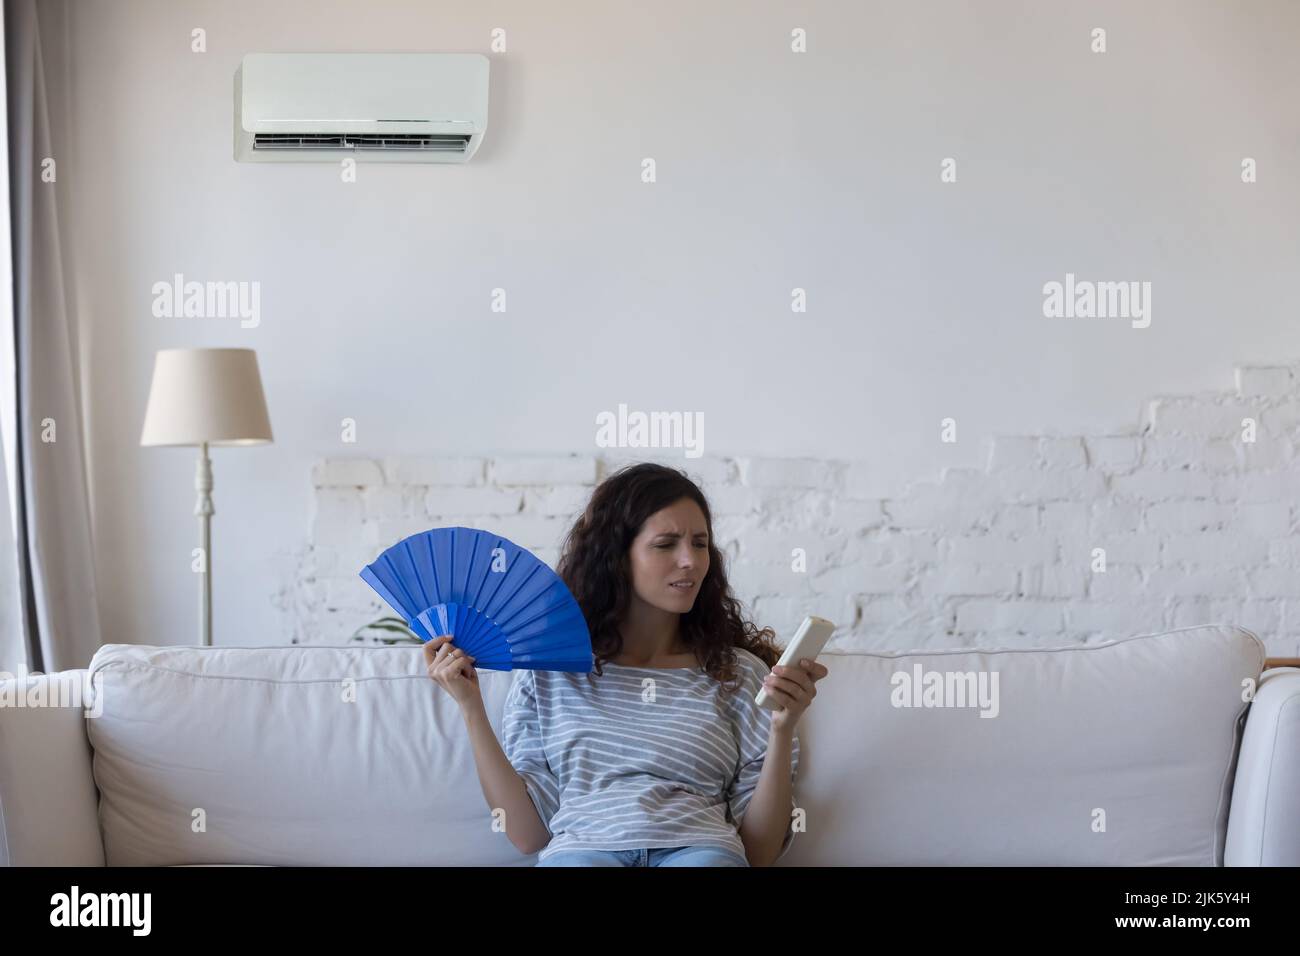 Annoyed homeowner young woman frustrated with heat Stock Photo